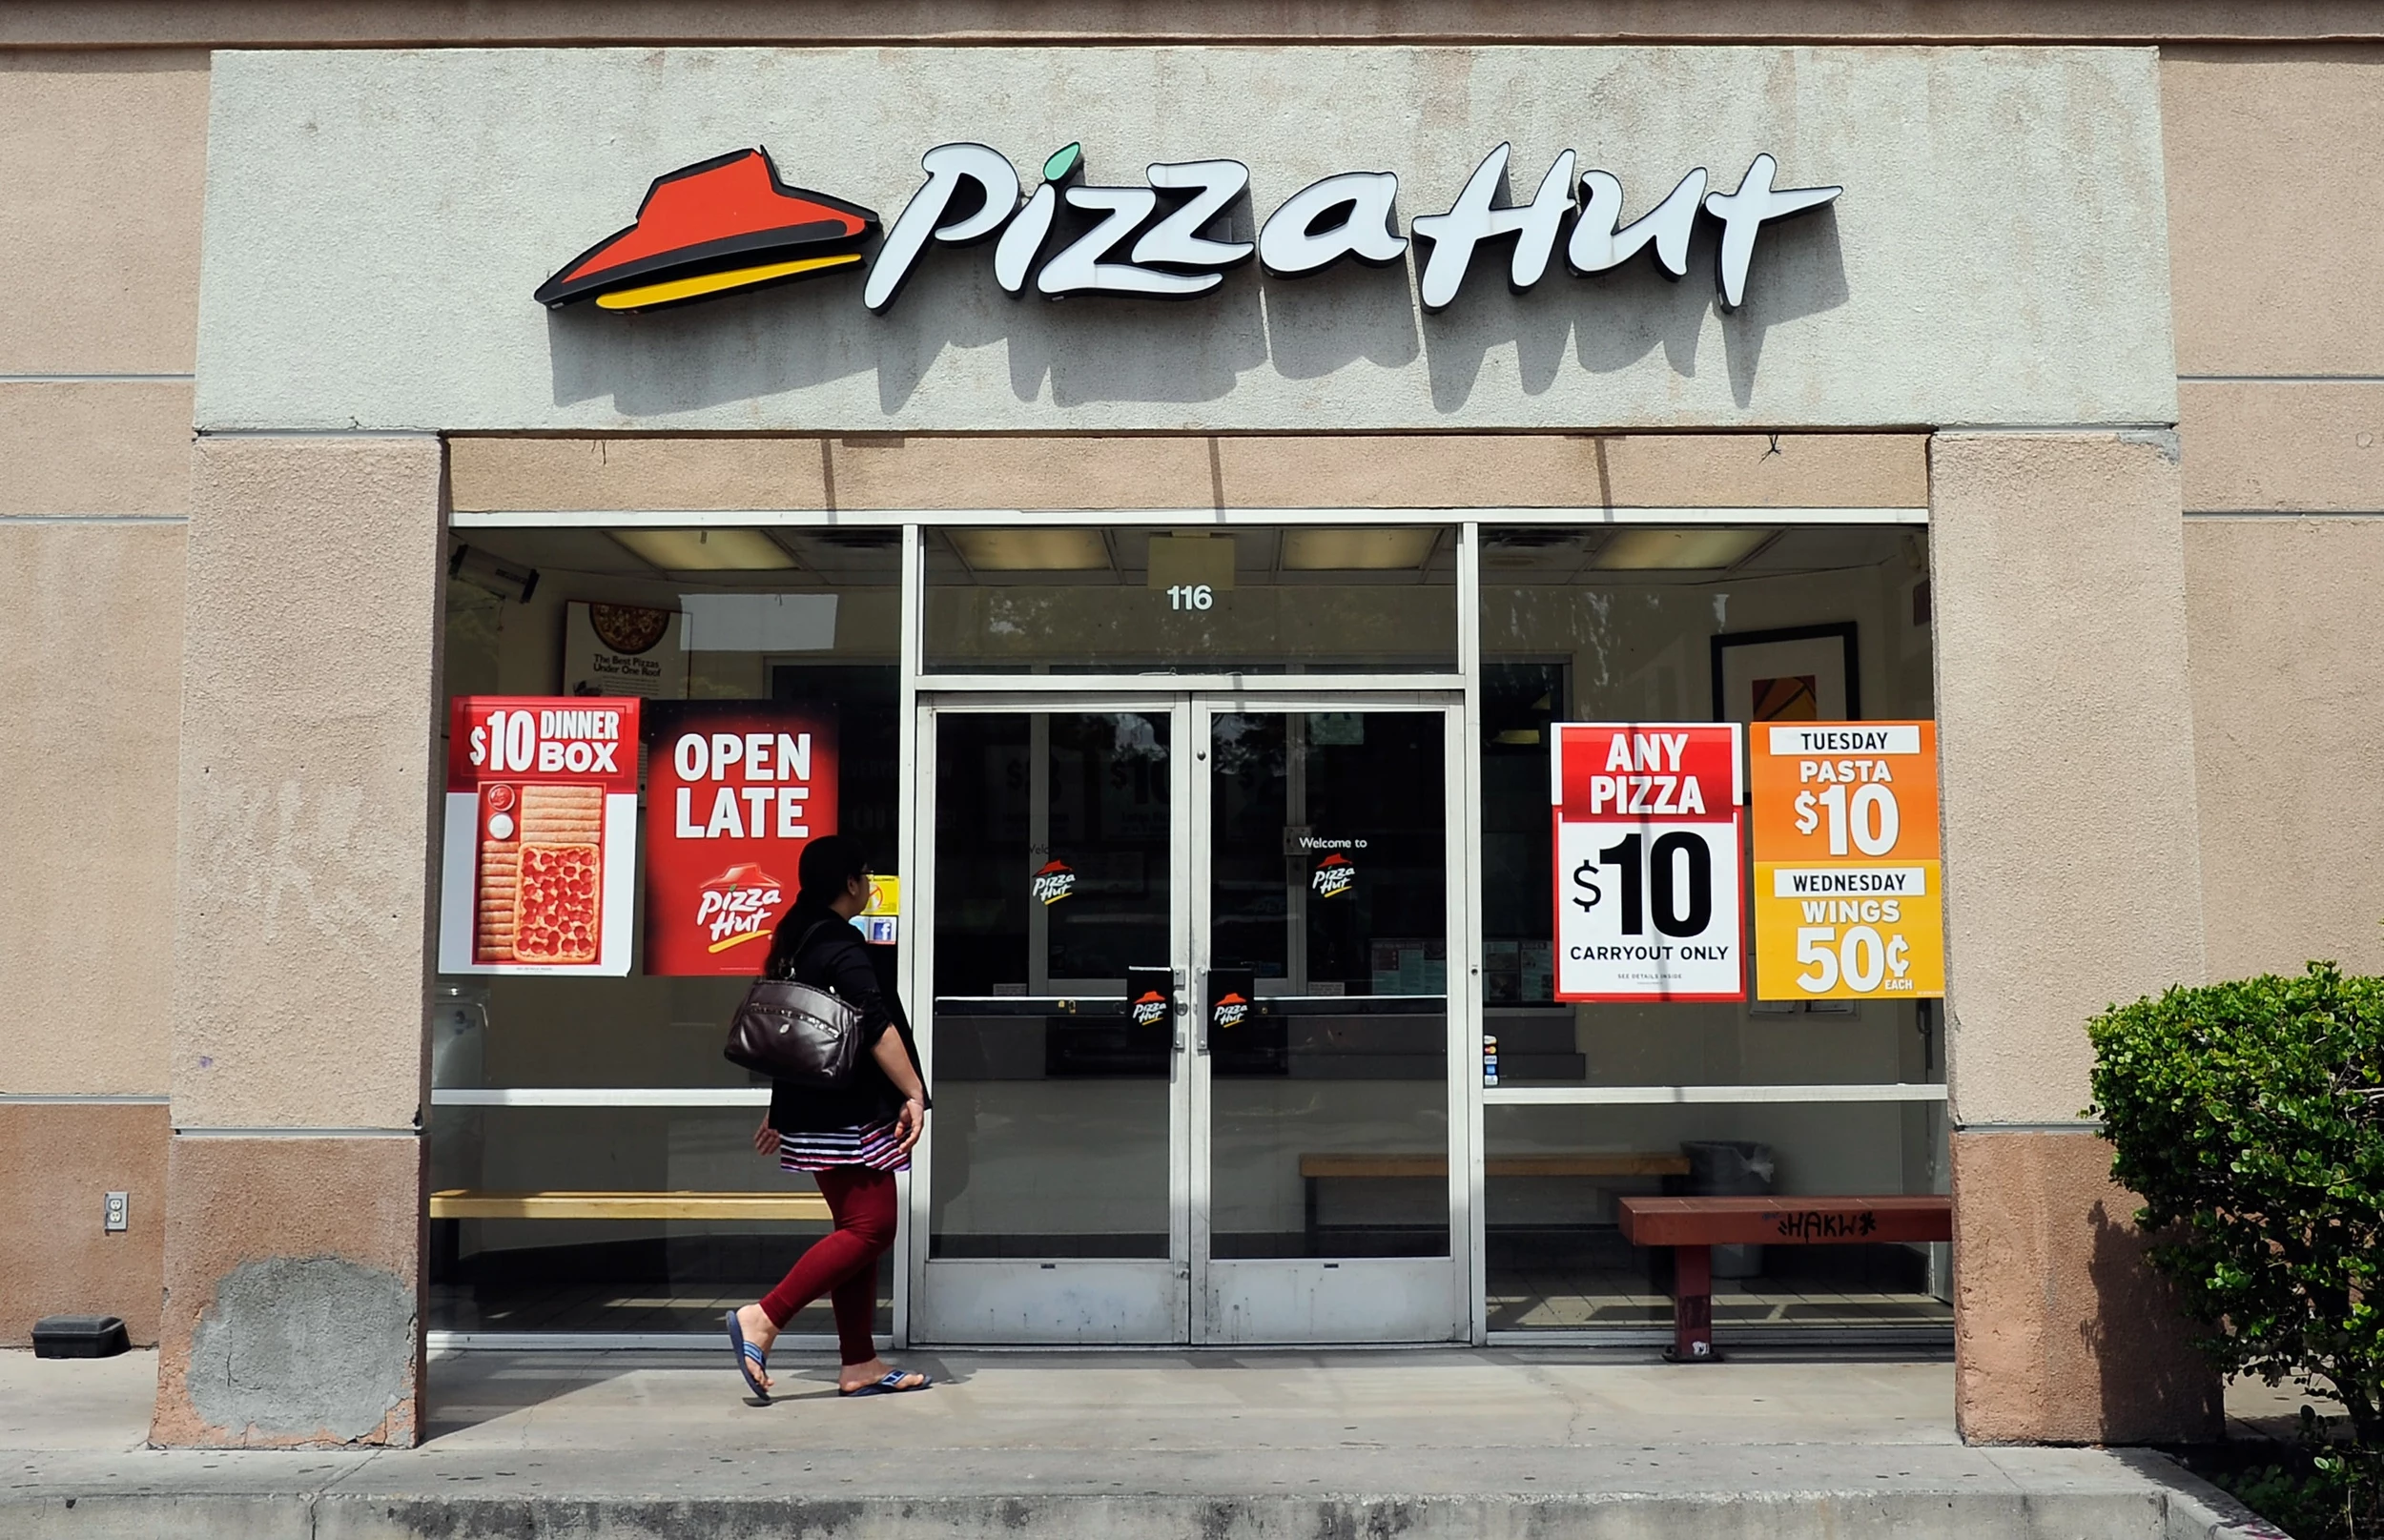 Why I Celebrated 10 Years of Pizza Touring with a Pizza Hut